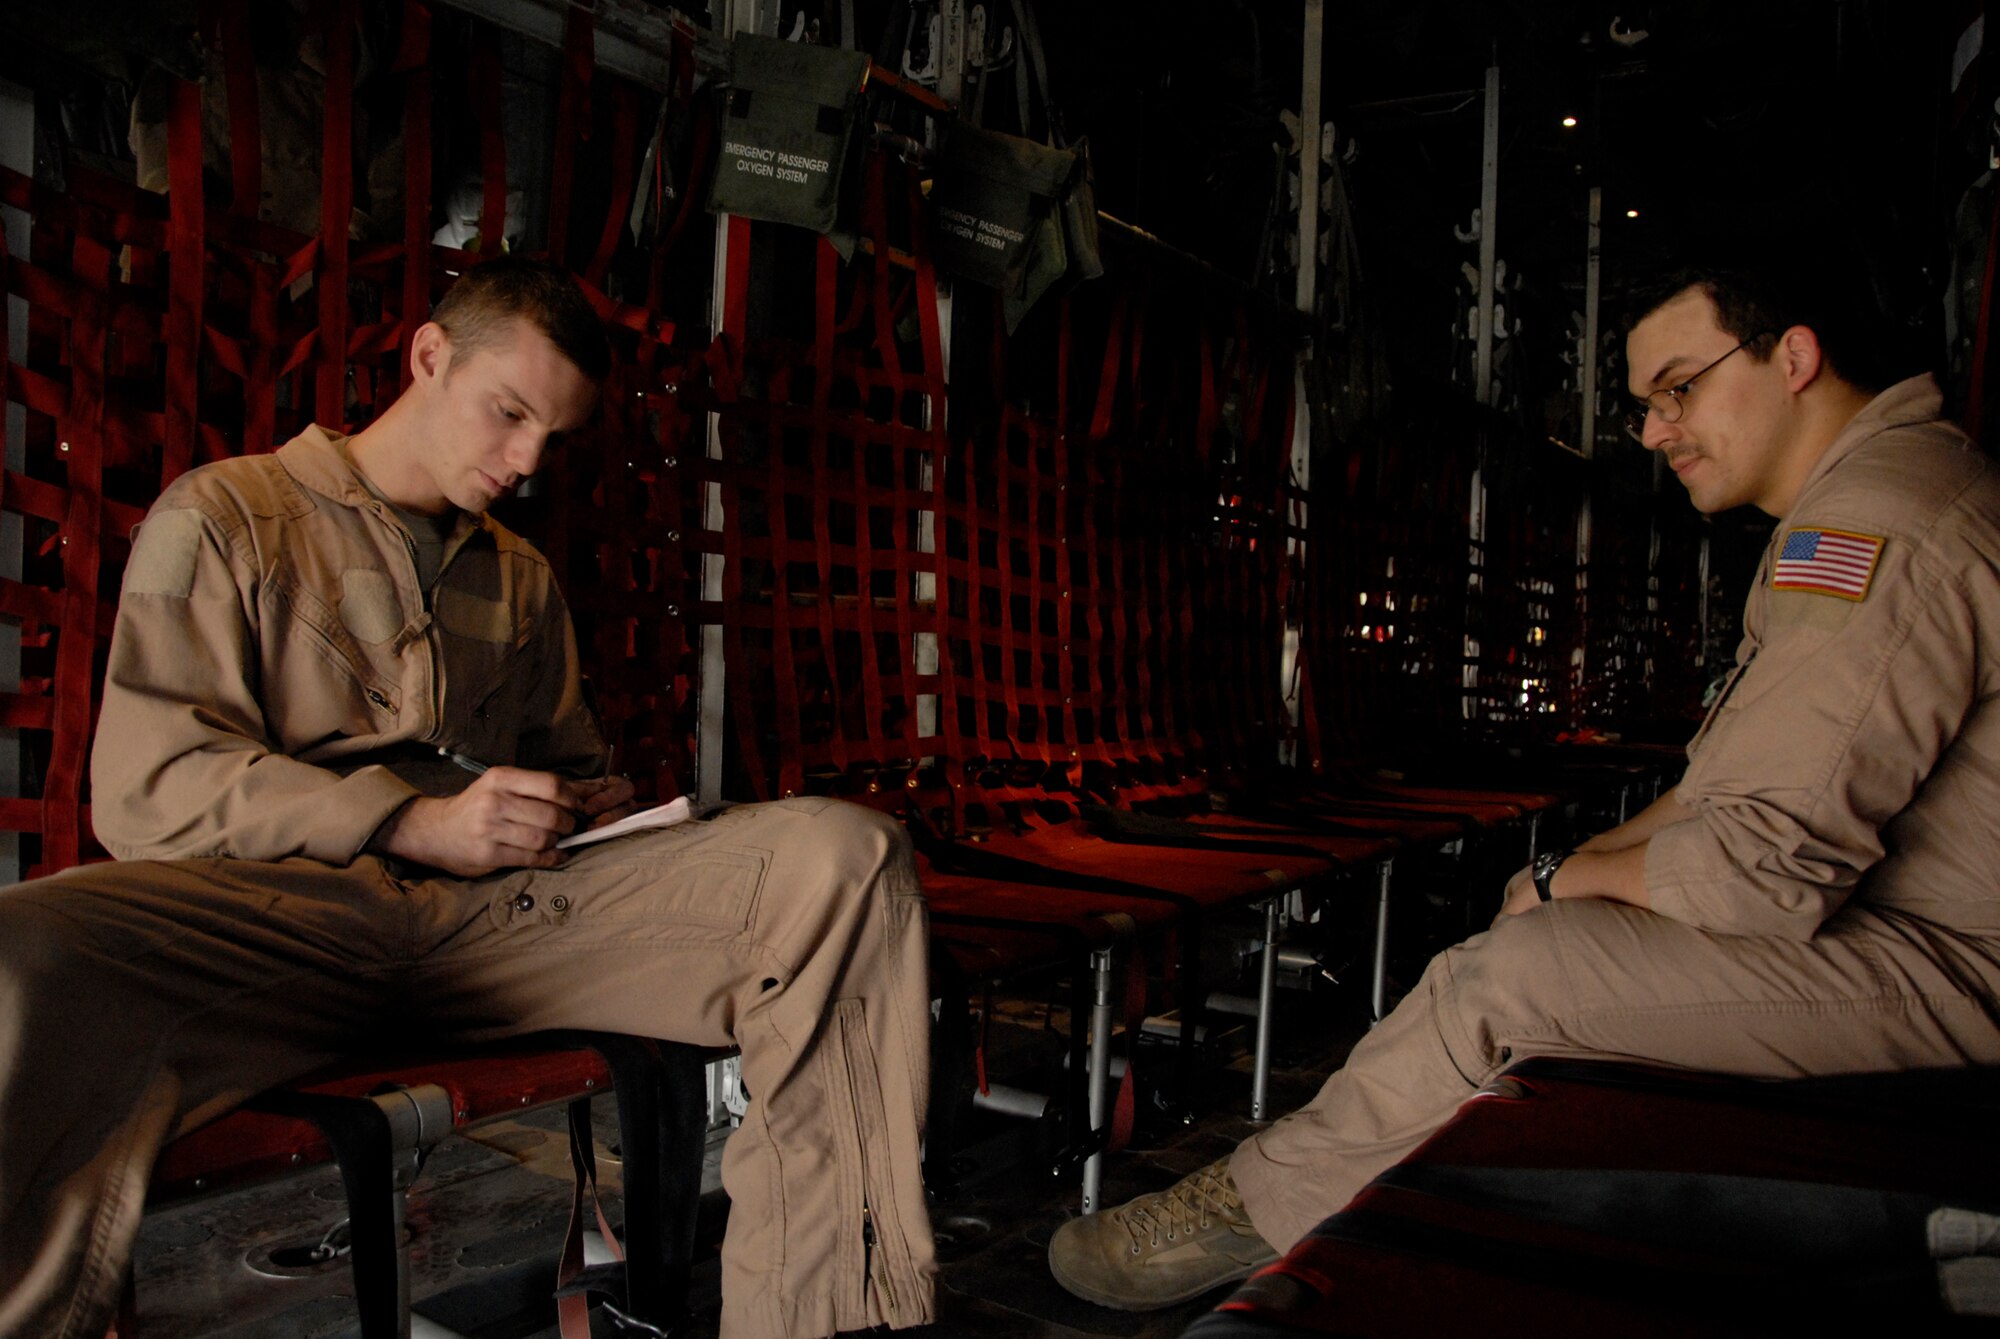 SOUTHWEST ASIA -- Senior Airman Zachary Kelhi (left) and Airman 1st Class Armando Baez, both C-130 Hercules loadmasters deployed to the 737th Expeditionary Airlift Squadron, calculate the weight and balance of a C-130 Hercules prior to the take-off of a combat sortie that transported Soldiers into Iraq April 21, 2008, from an air base in the Persian Gulf Region. The Air Force recently surpassed more than one million sorties flown by Air Force aircraft in the Global War on Terror since Sept. 11, 2001. Synchronized and integrated into larger coalition air efforts, these missions represent the most deliberate, disciplined and precise air campaign in history. Airmen Kelhi and Baez are both deployed from the 39th Airlift Squadron, Dyess Air Force Base, Texas. (U.S. Air Force photo/ Staff Sgt. Patrick Dixon)